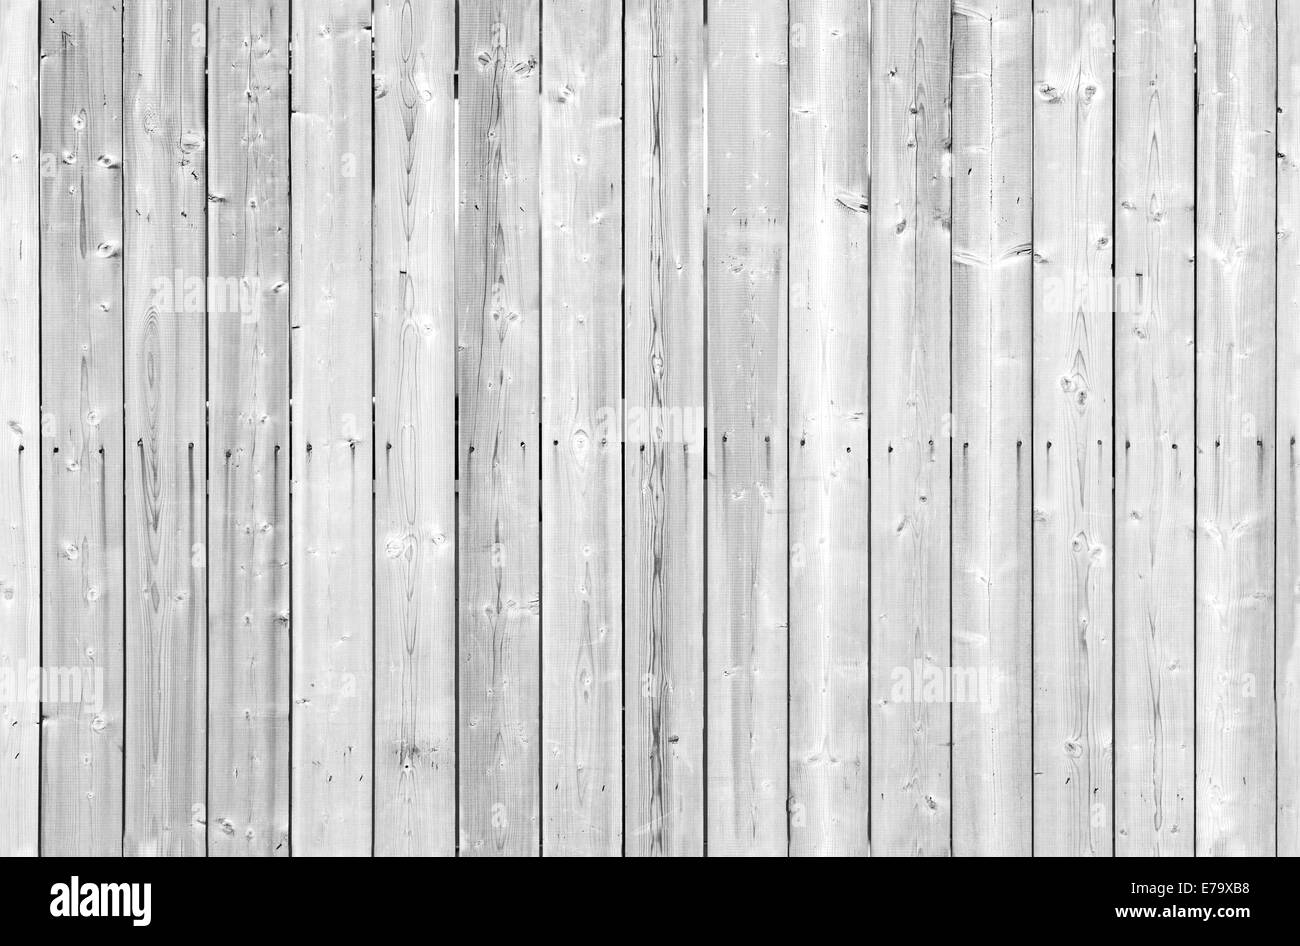 Seamless background texture of white painted wooden wall Stock Photo